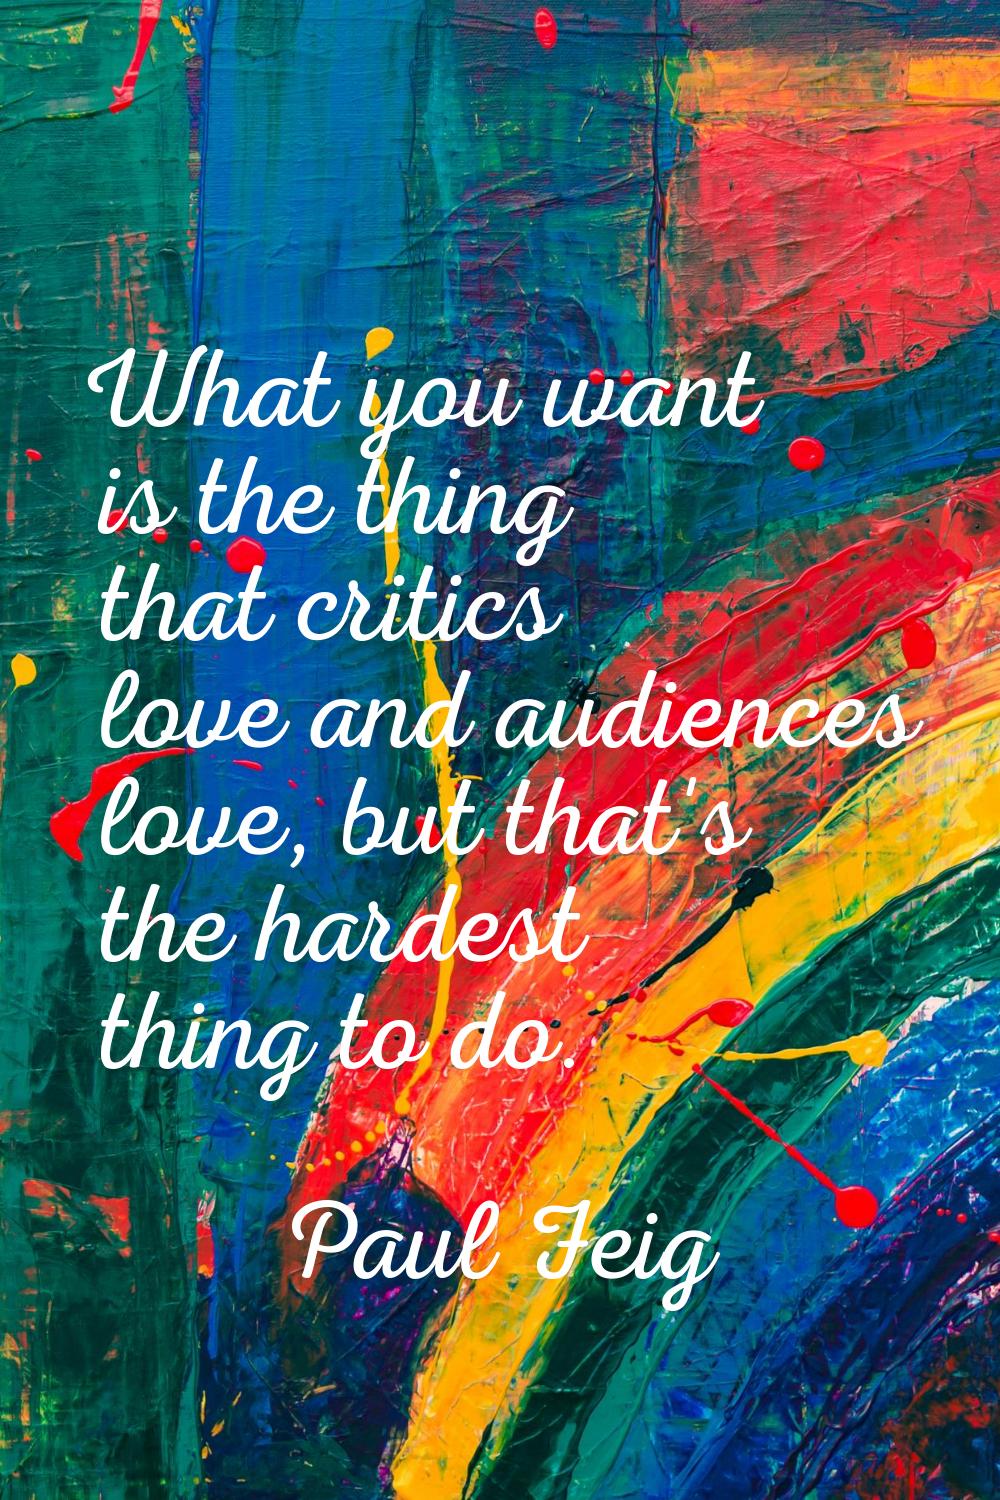 What you want is the thing that critics love and audiences love, but that's the hardest thing to do